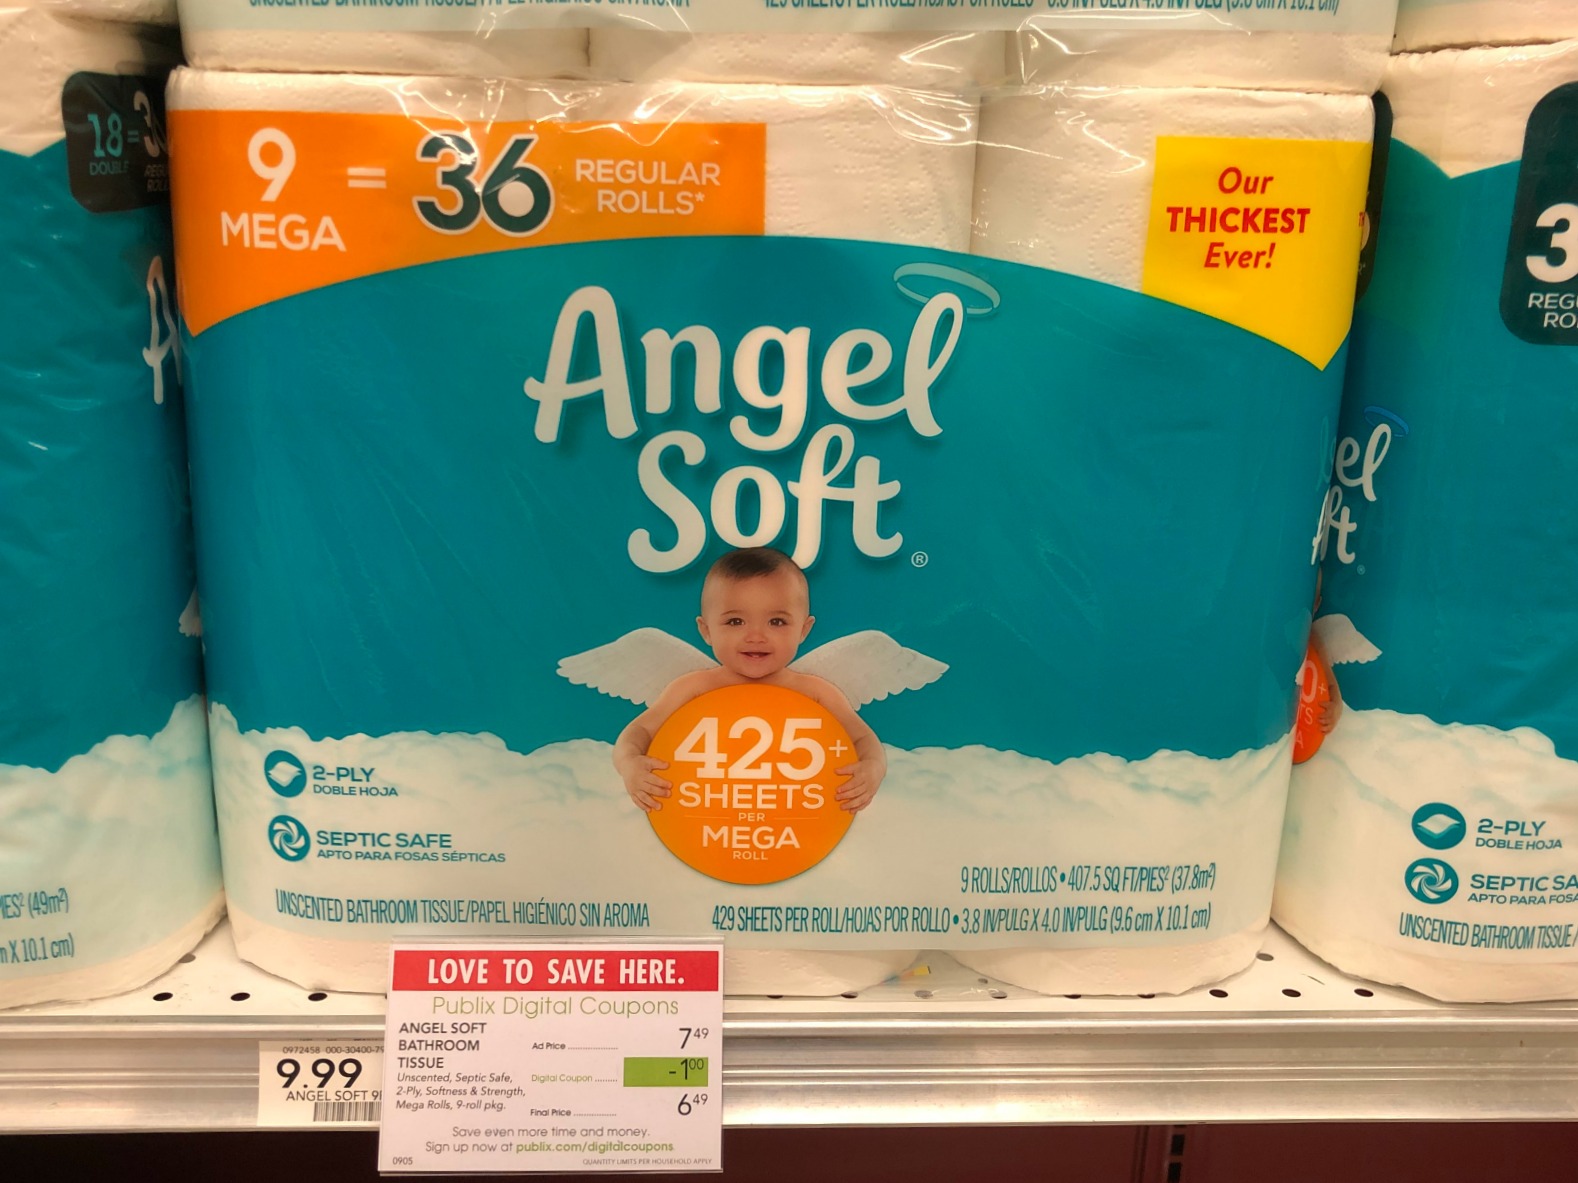 Fantastic Price On Big Packs Of Angel Soft® Bathroom Tissue As Part Of The Current Publix Ad on I Heart Publix 1